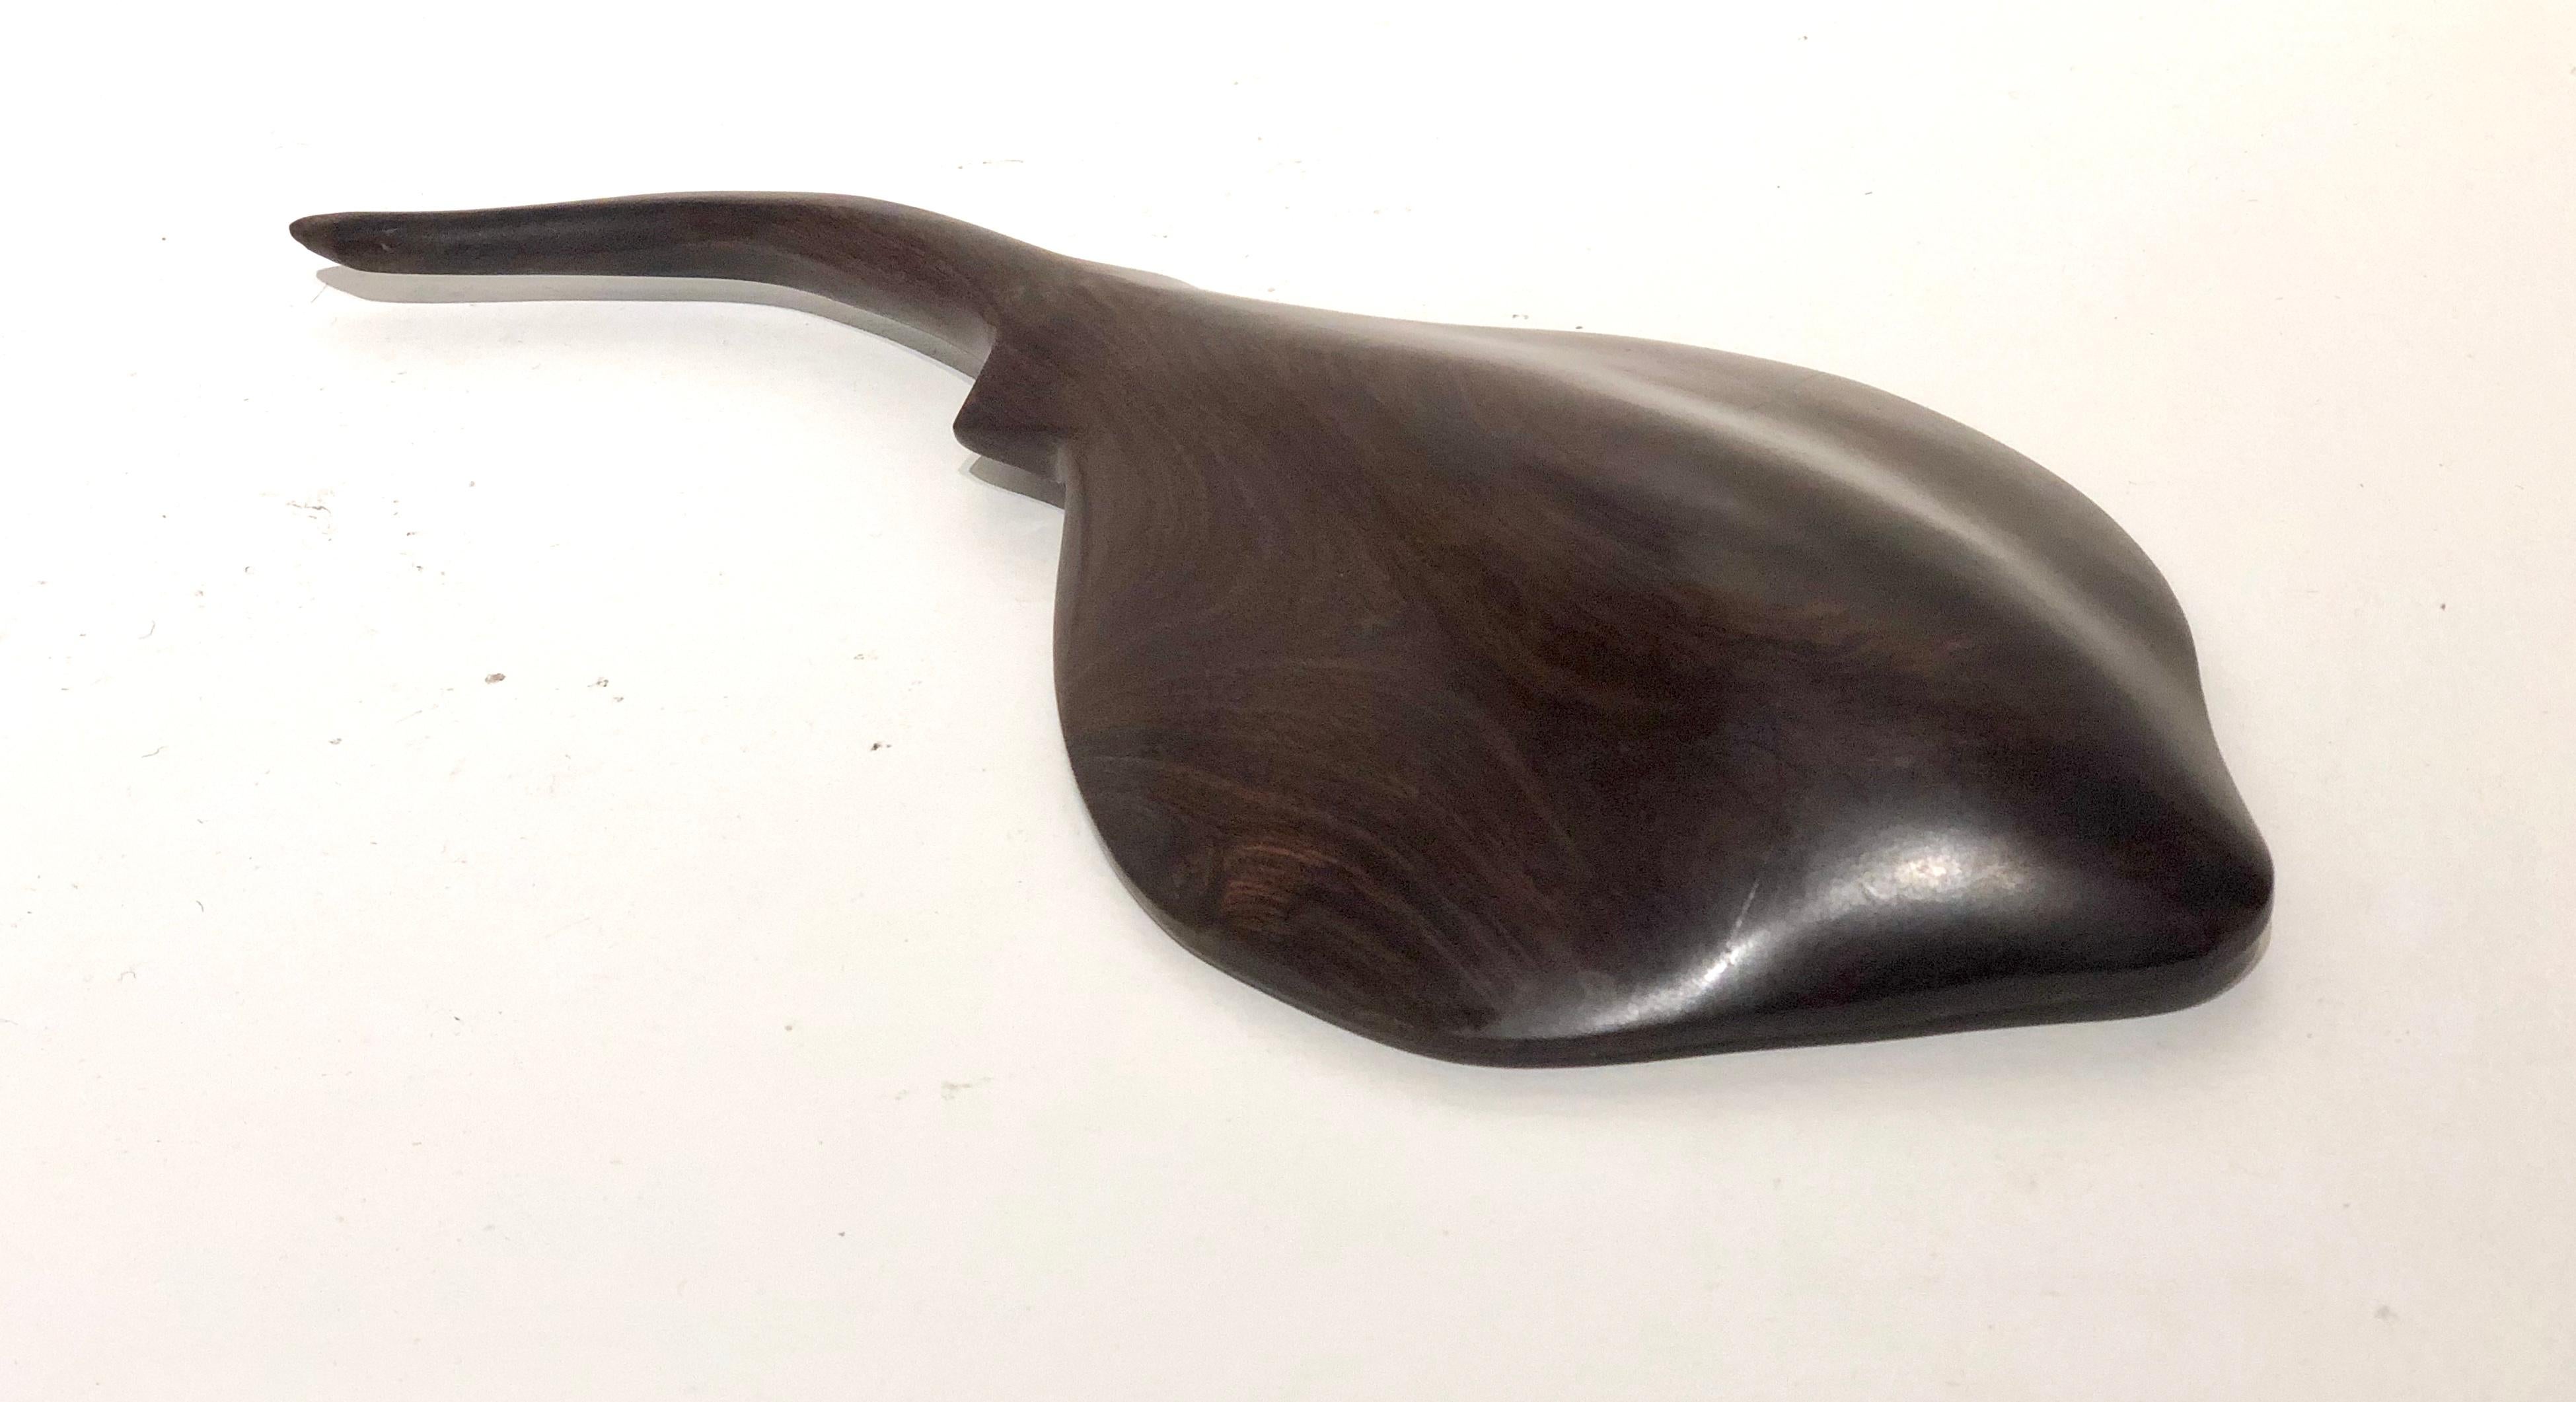 Beautiful solid rosewood handcrafted sculpture, circa 1970s, nice finish soft to touch.